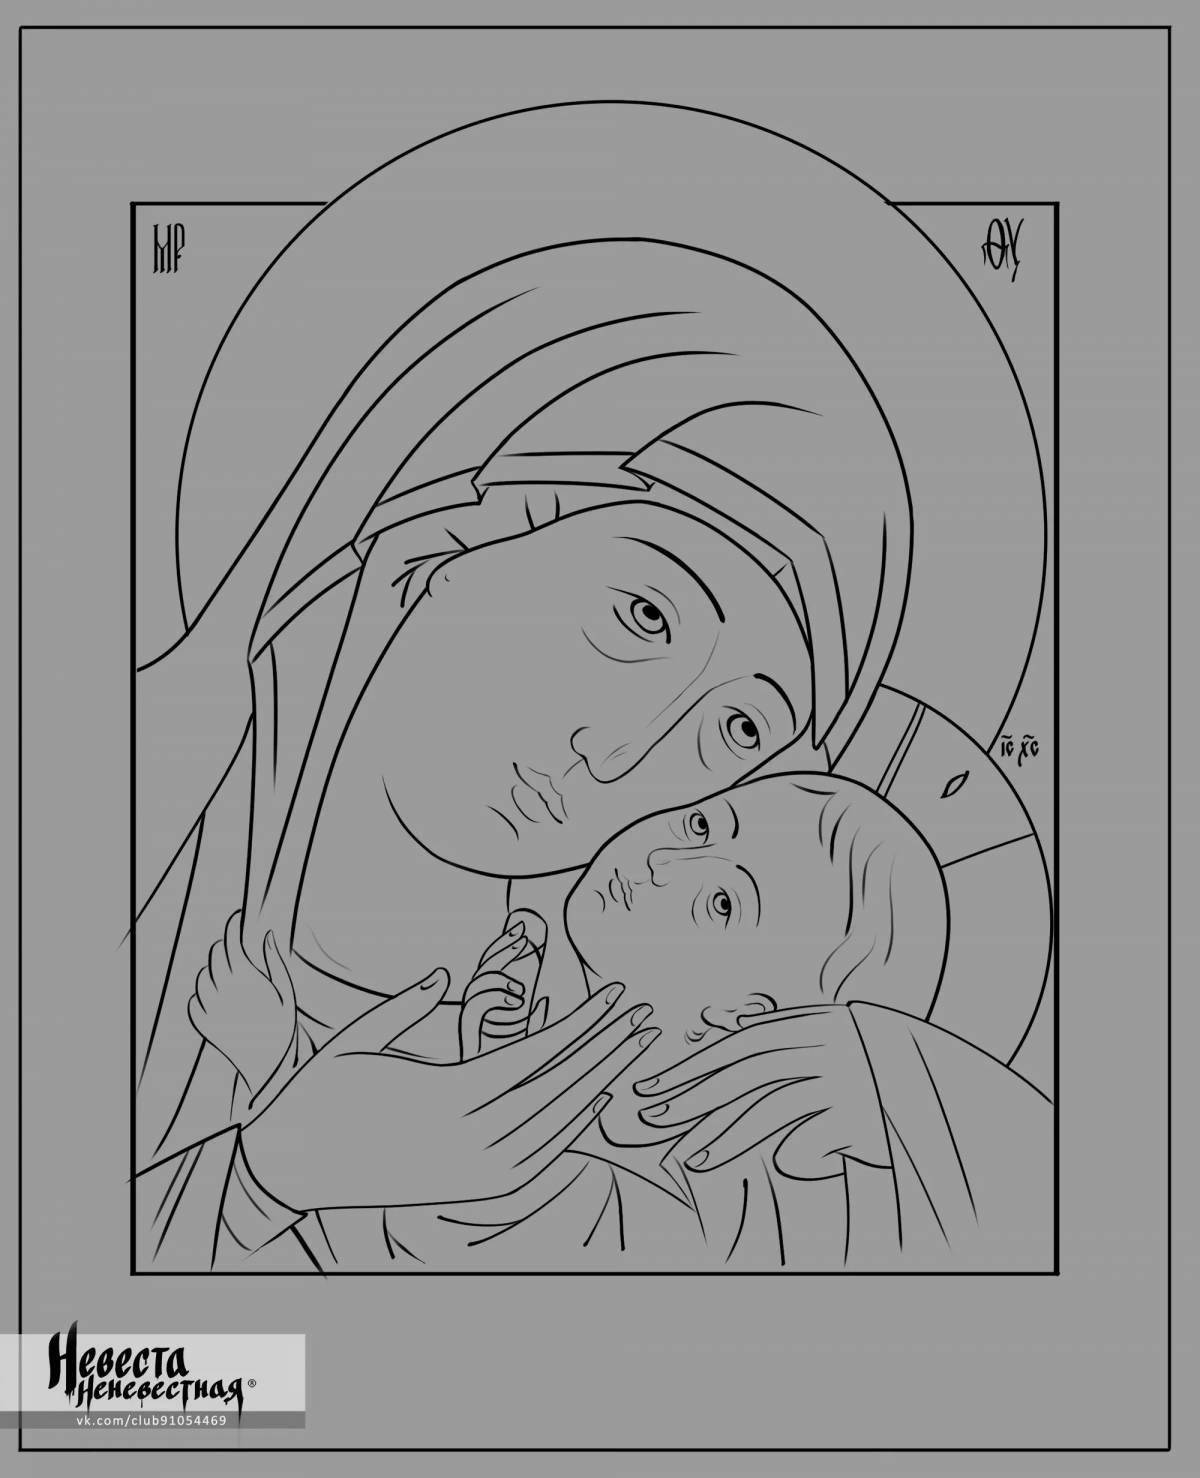 Brilliant coloring of the virgin mary and child